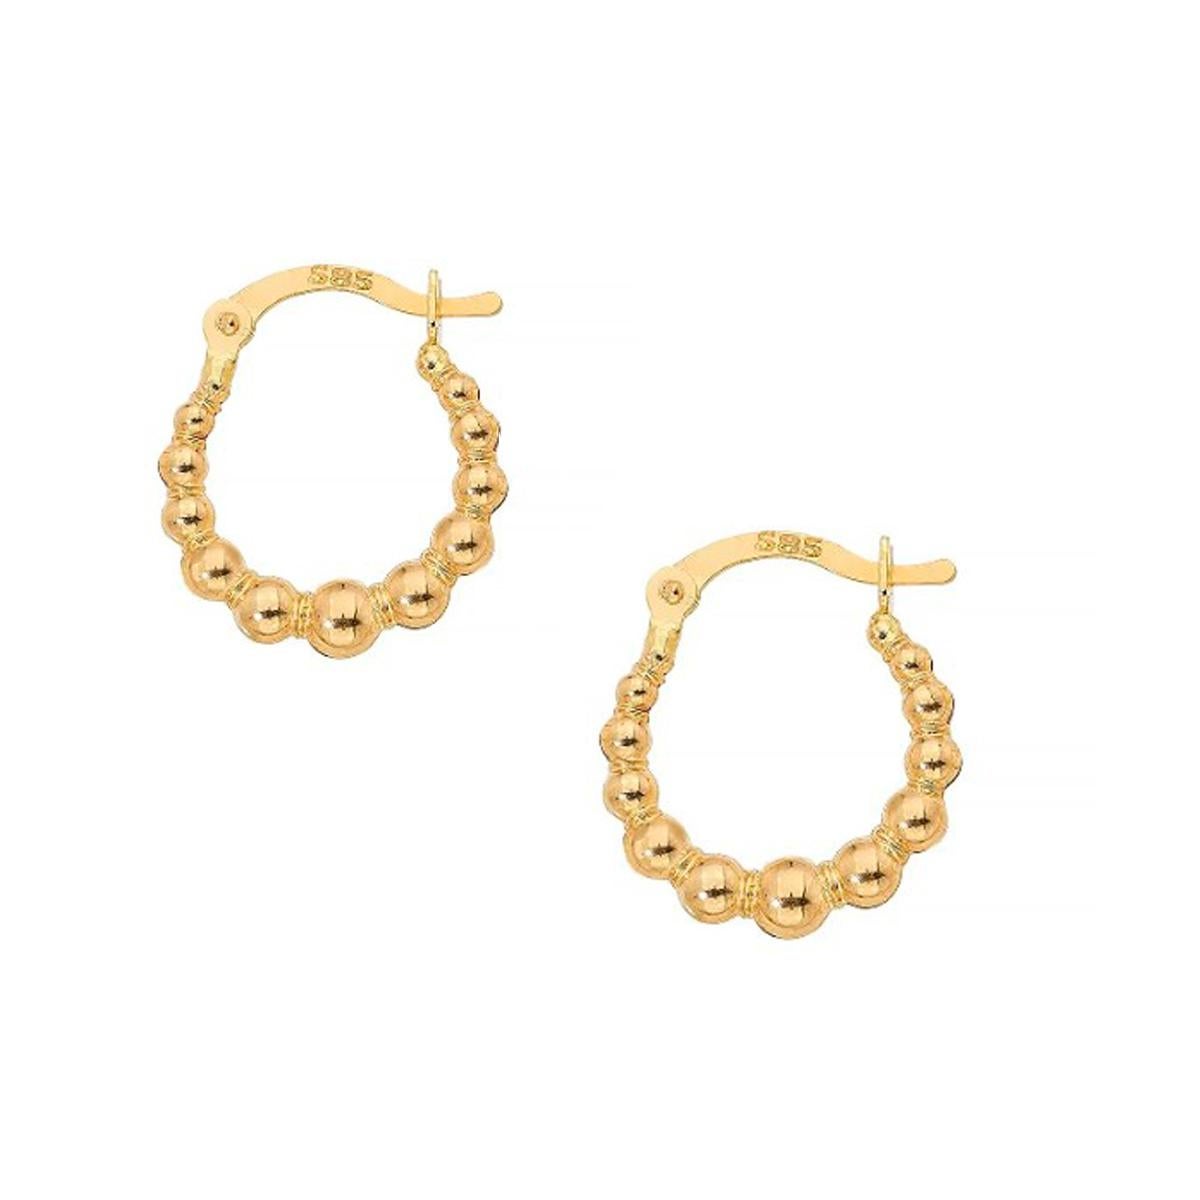 14 kt solid gold Huggie hoop gold earrings. 14k Gold Simple Huggies, Minimalist Gold Hoop Earrings

Total weight: 0.87 g.
Closure: Wrap
Earring size: 15x18mm
Style: Minimalist
Sold as a pair.

This earrings - ready to ship in 3 working days. 
The